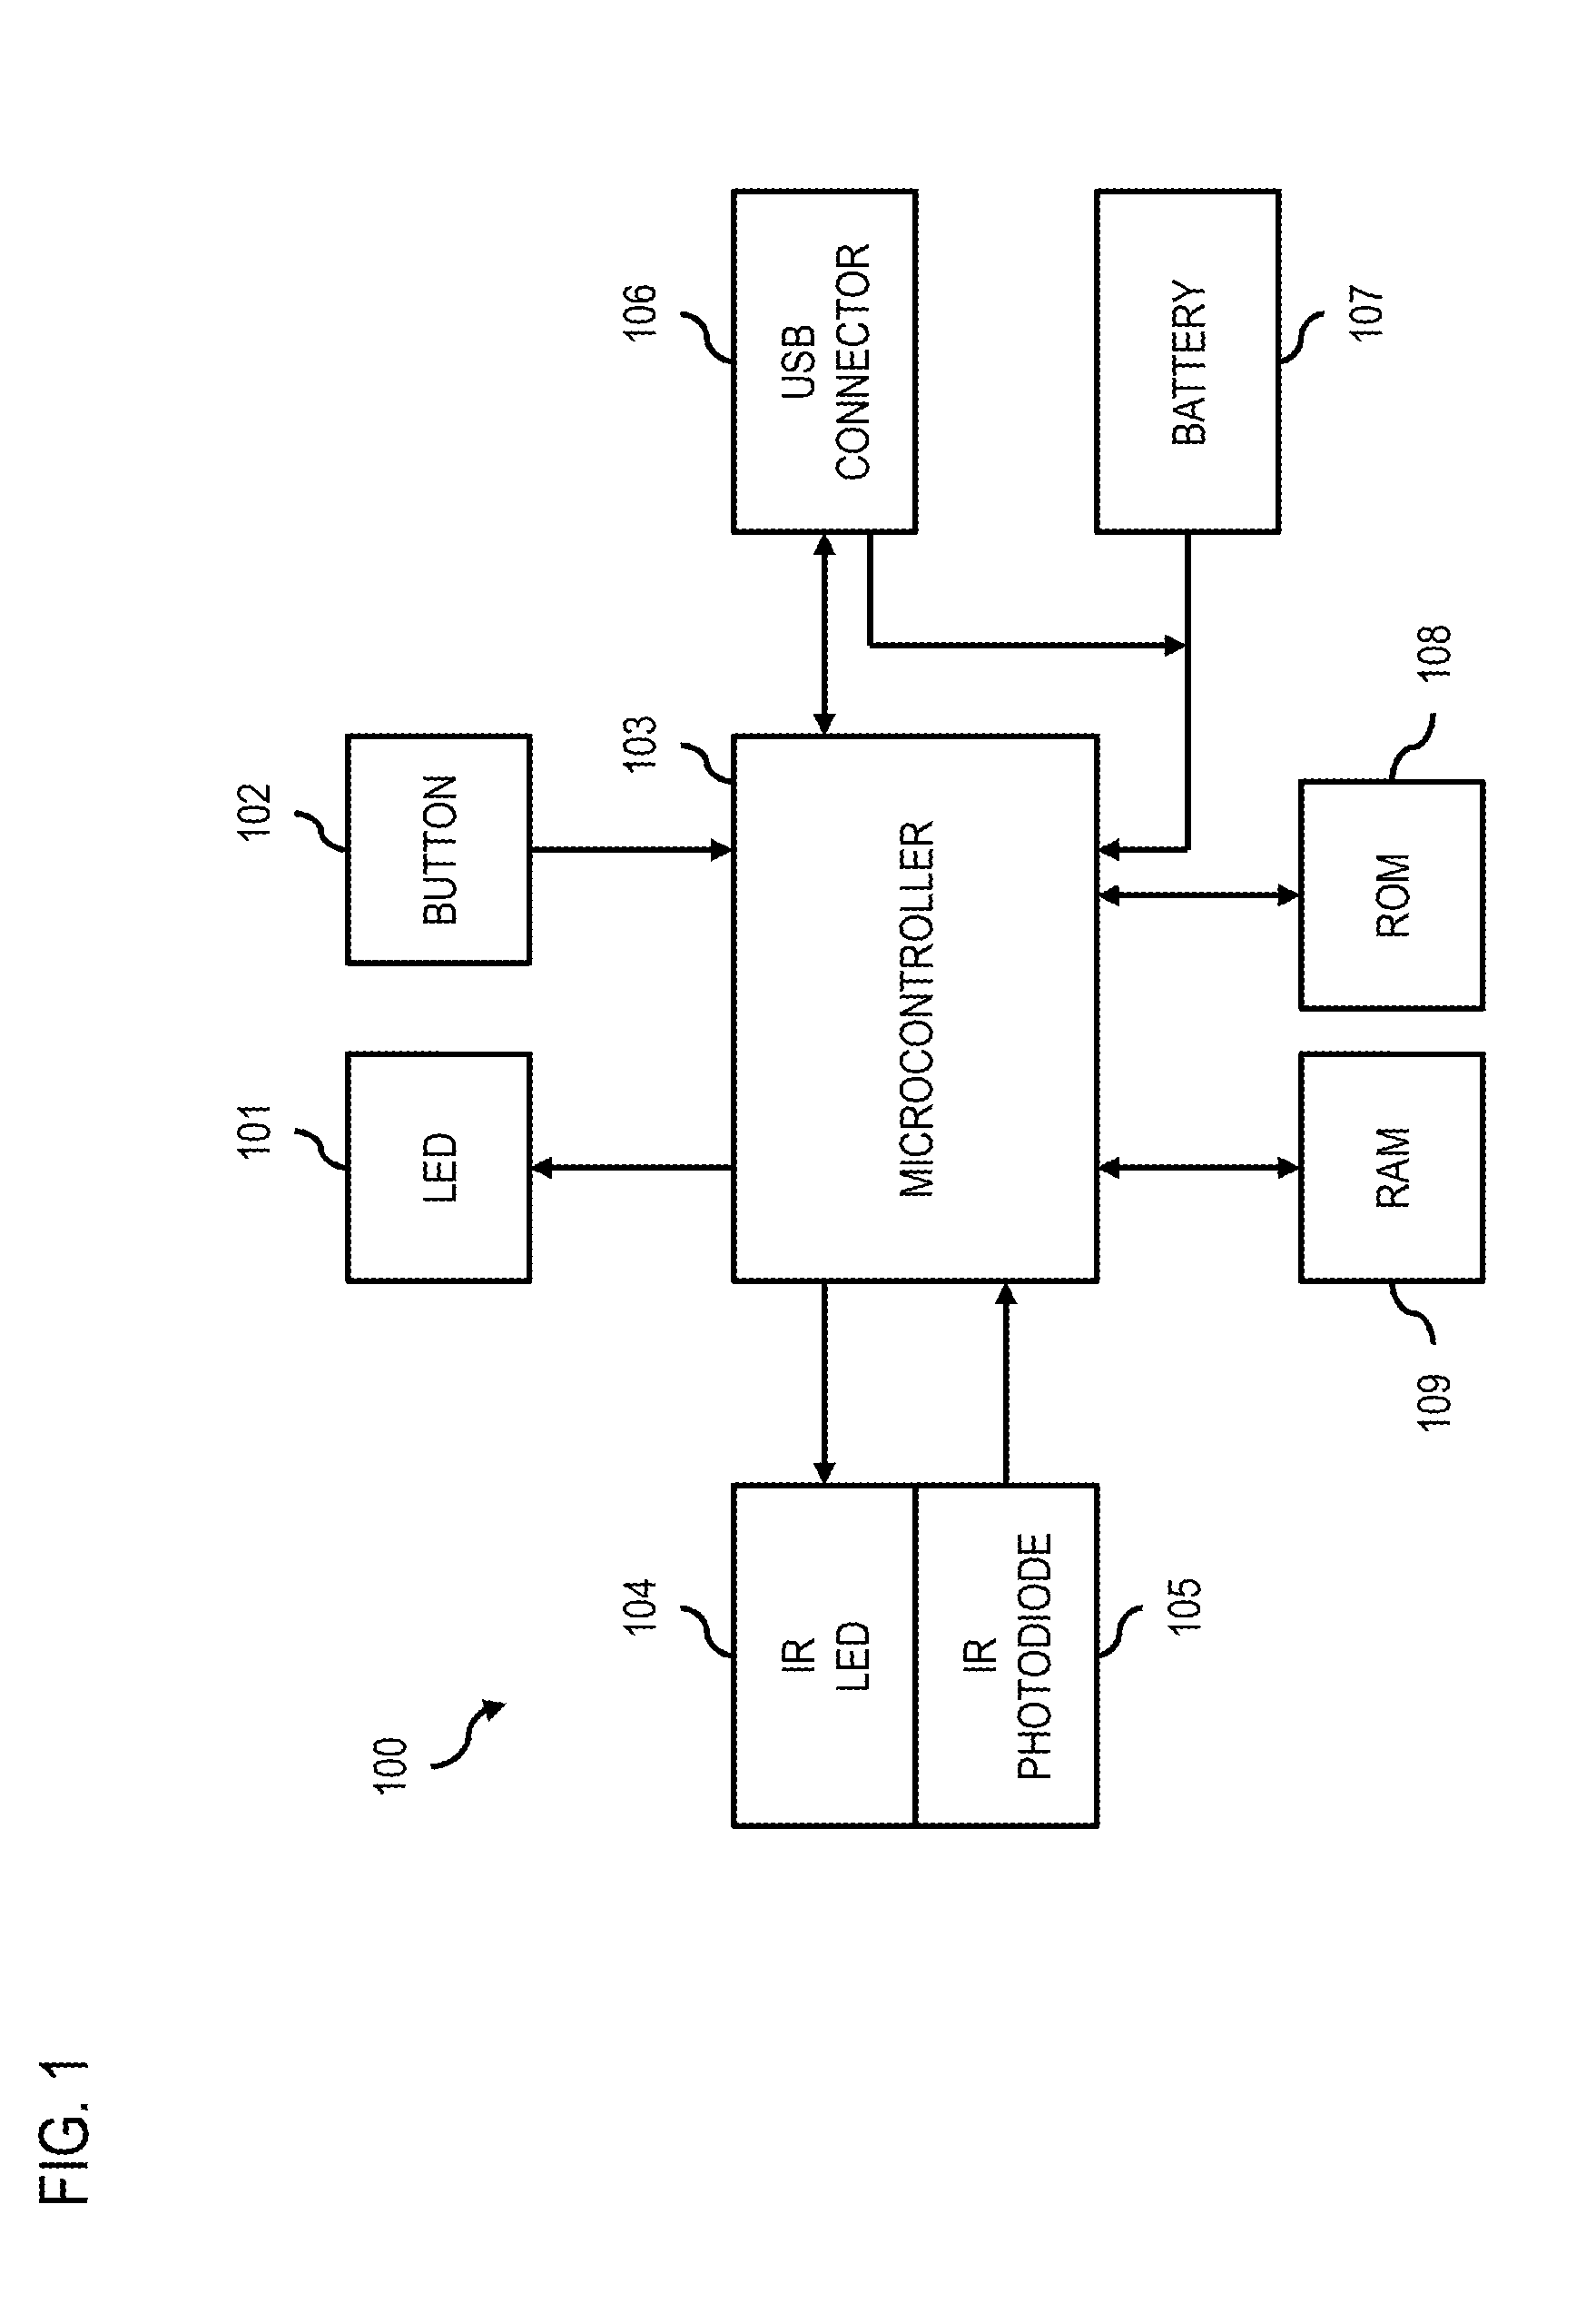 Method and apparatus for providing exchange of profile information